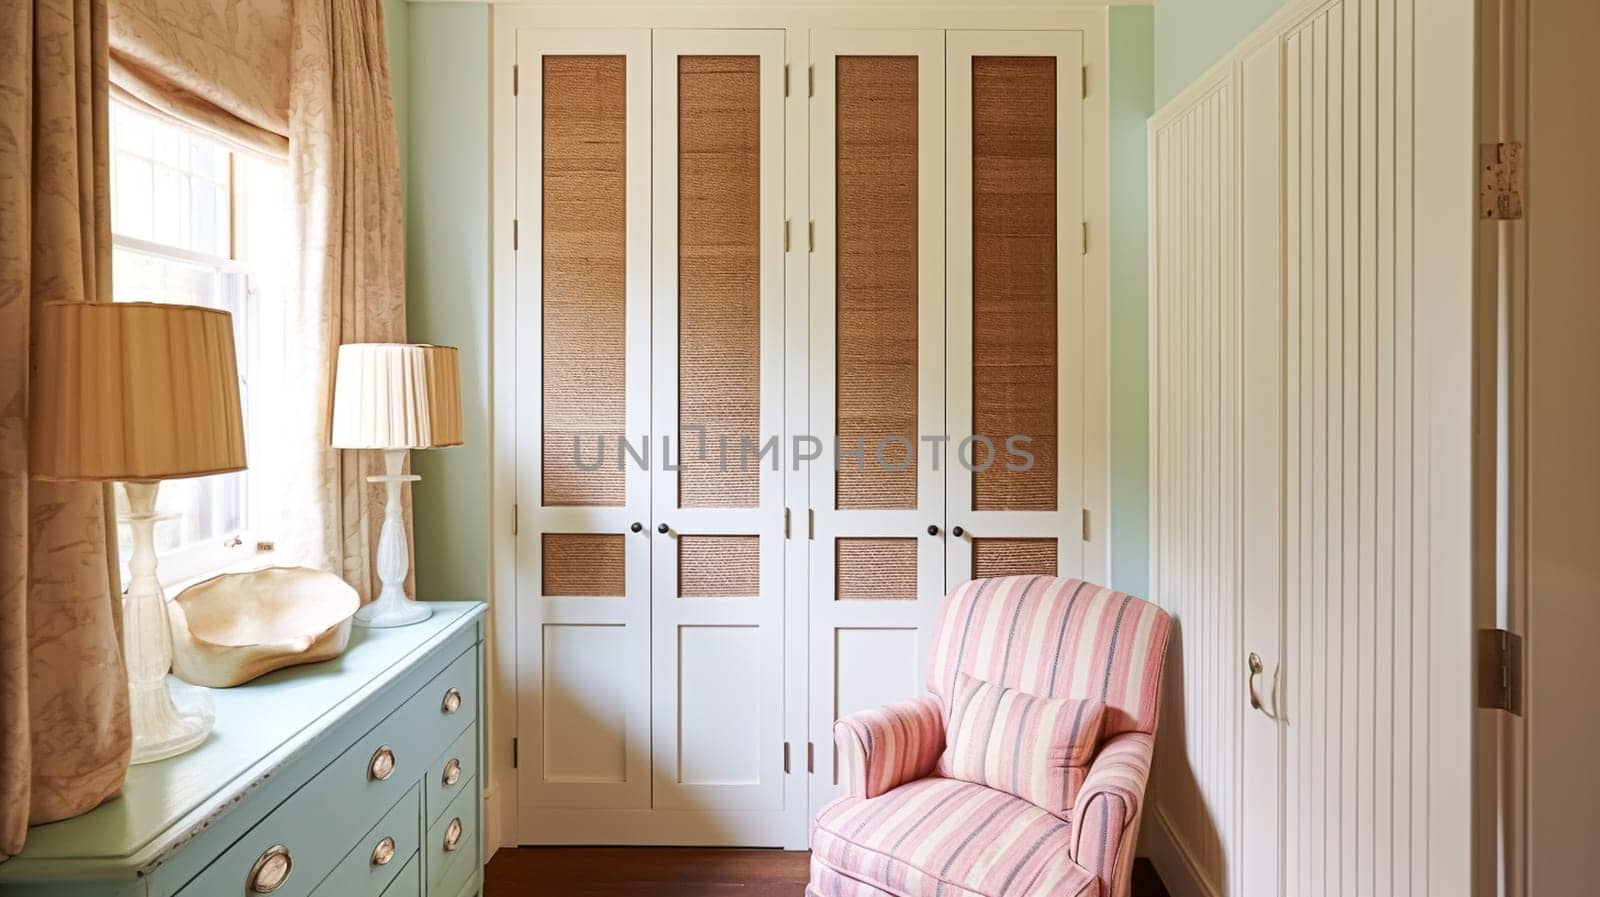 Cottage dressing room decor, interior design and country house home decor, pink arm chair and boot room or walk-in wardrobe furniture, English countryside style interiors